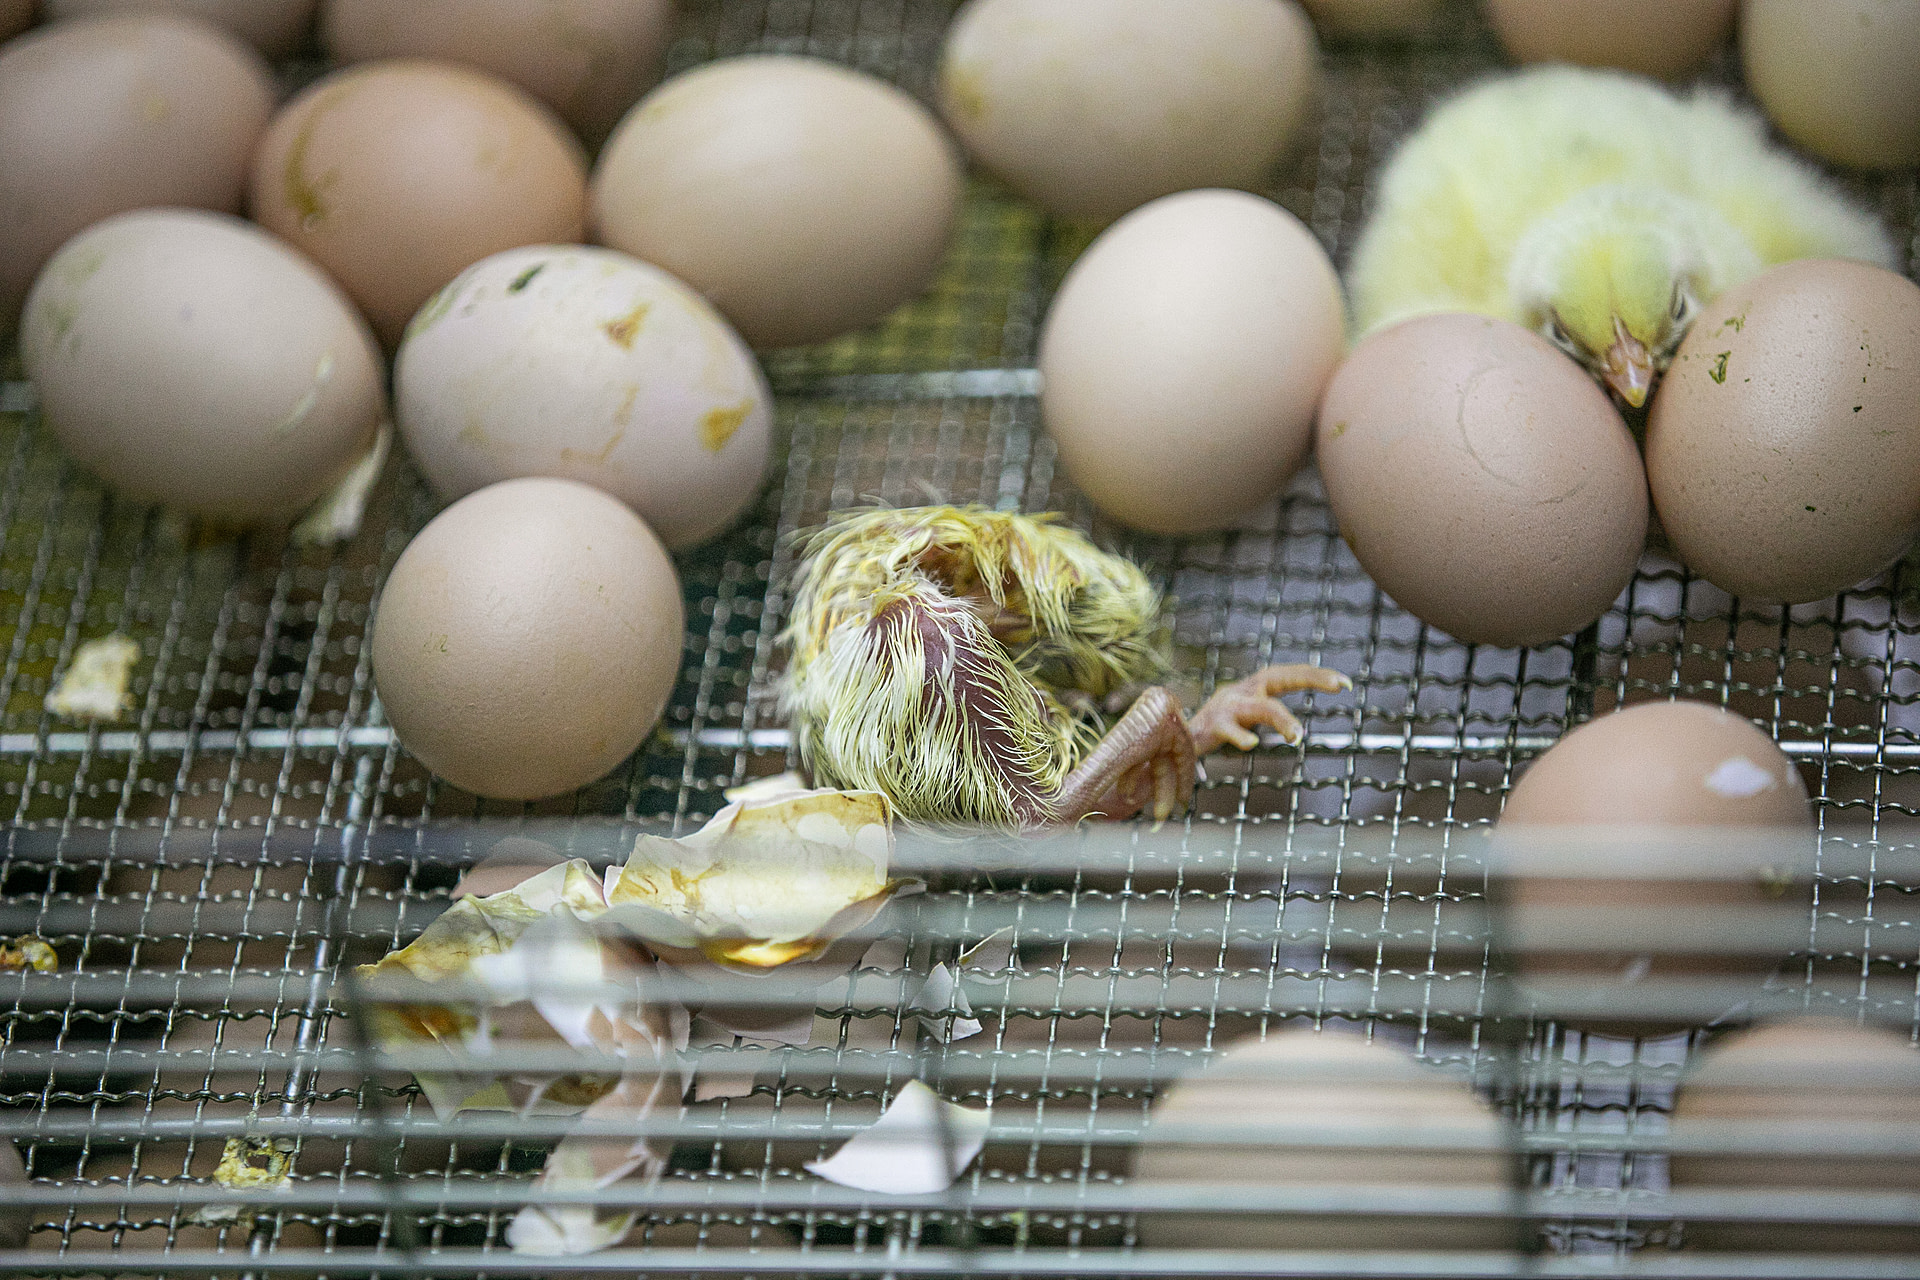 A dead chick lays amidst other birds in various stages of hatching at a hatchery in Ukraine. Many chicks die in the egg before they hatch and they will be disposed of in a grinder along with the weak and ailing chicks from the brood.